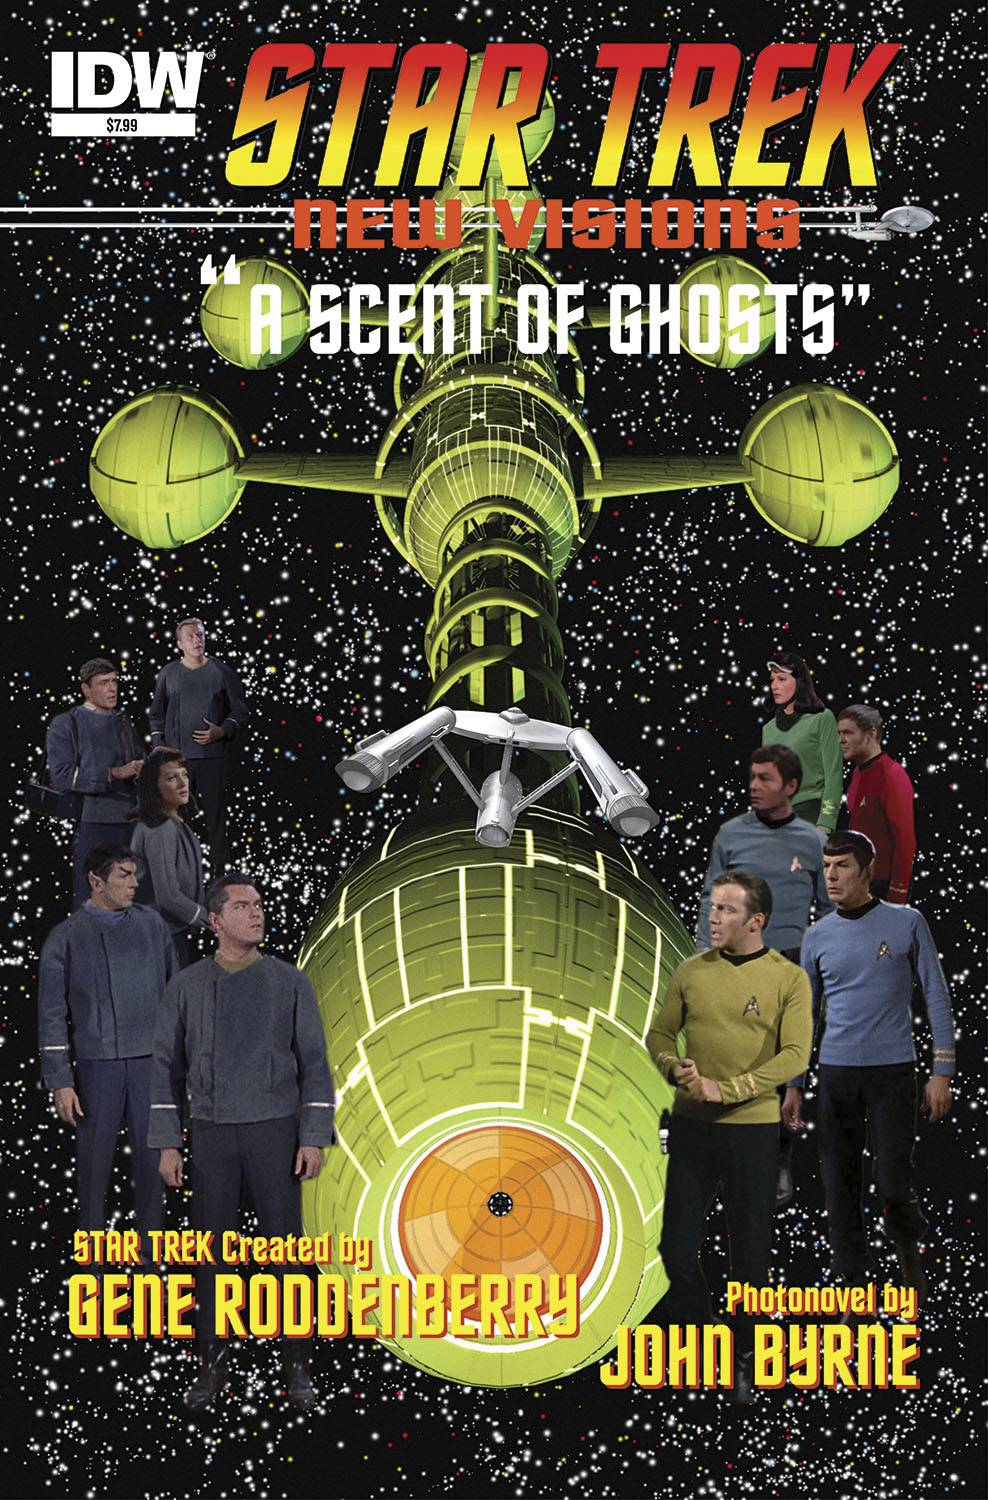 Star Trek New Visions A Scent of Ghosts